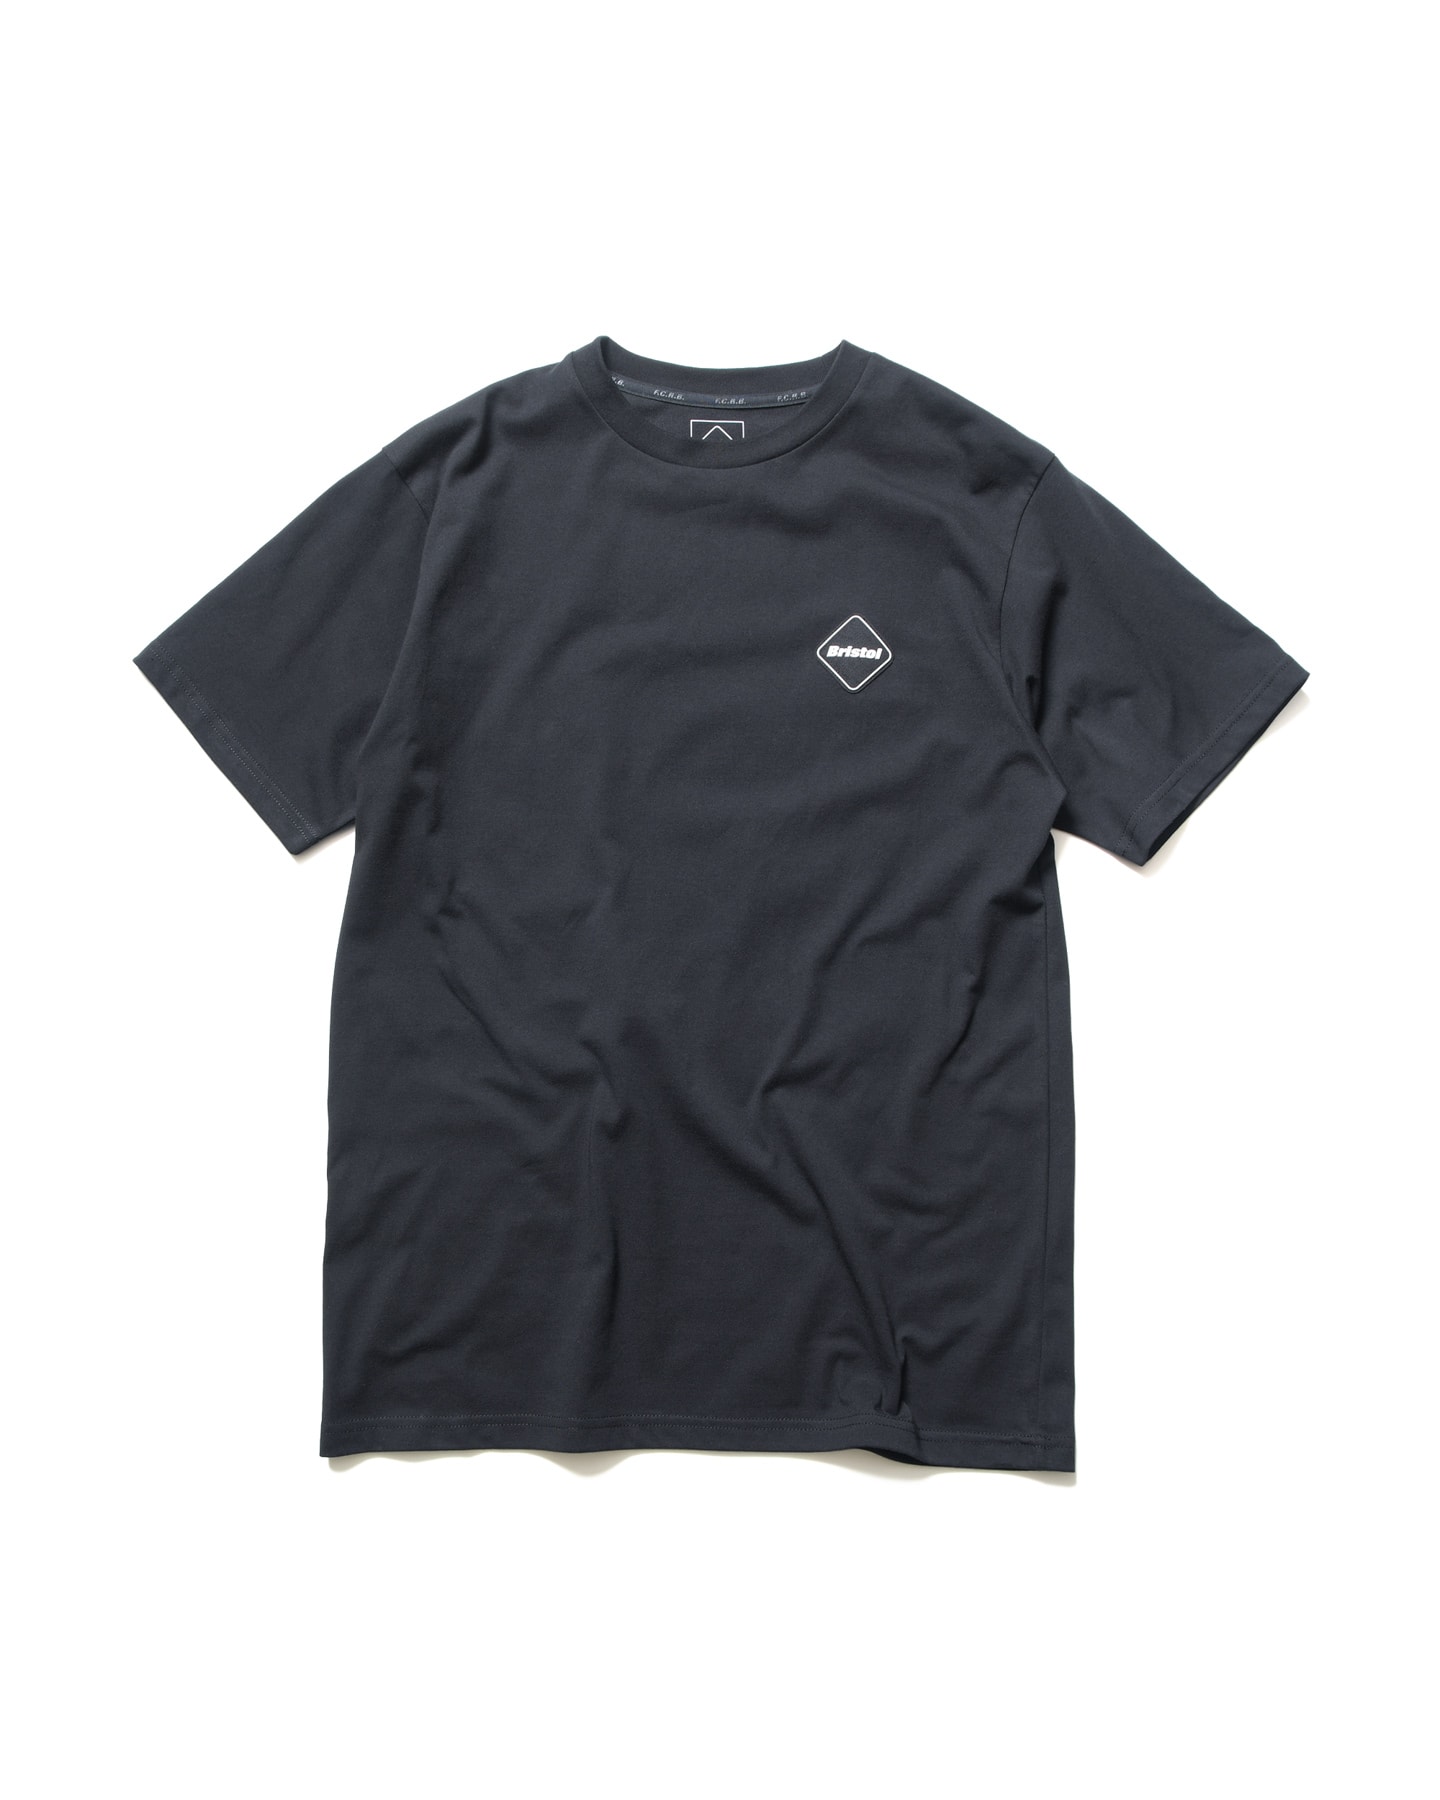 AW23 FCRB 50 LETTERED EMBLEM TEE - Tシャツ/カットソー(半袖/袖なし)